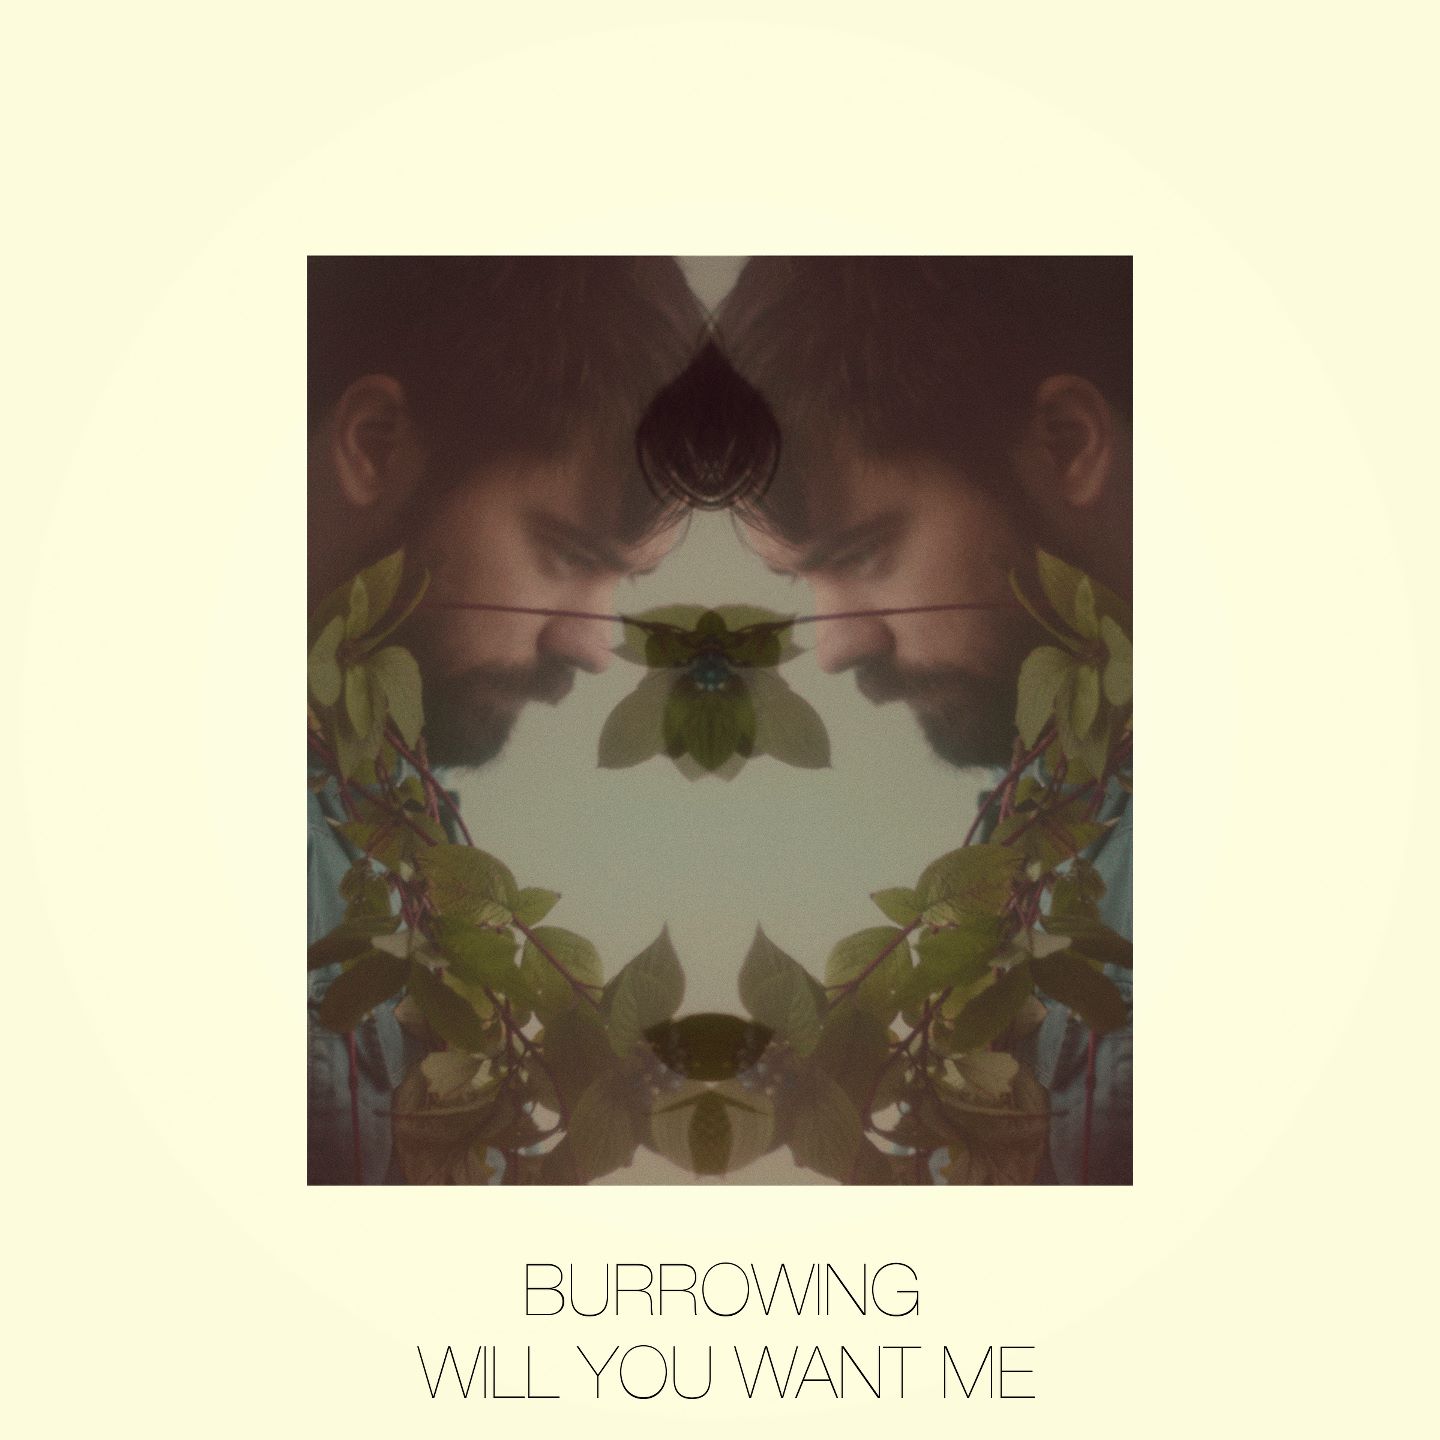 BURROWING – “Will You Want Me”